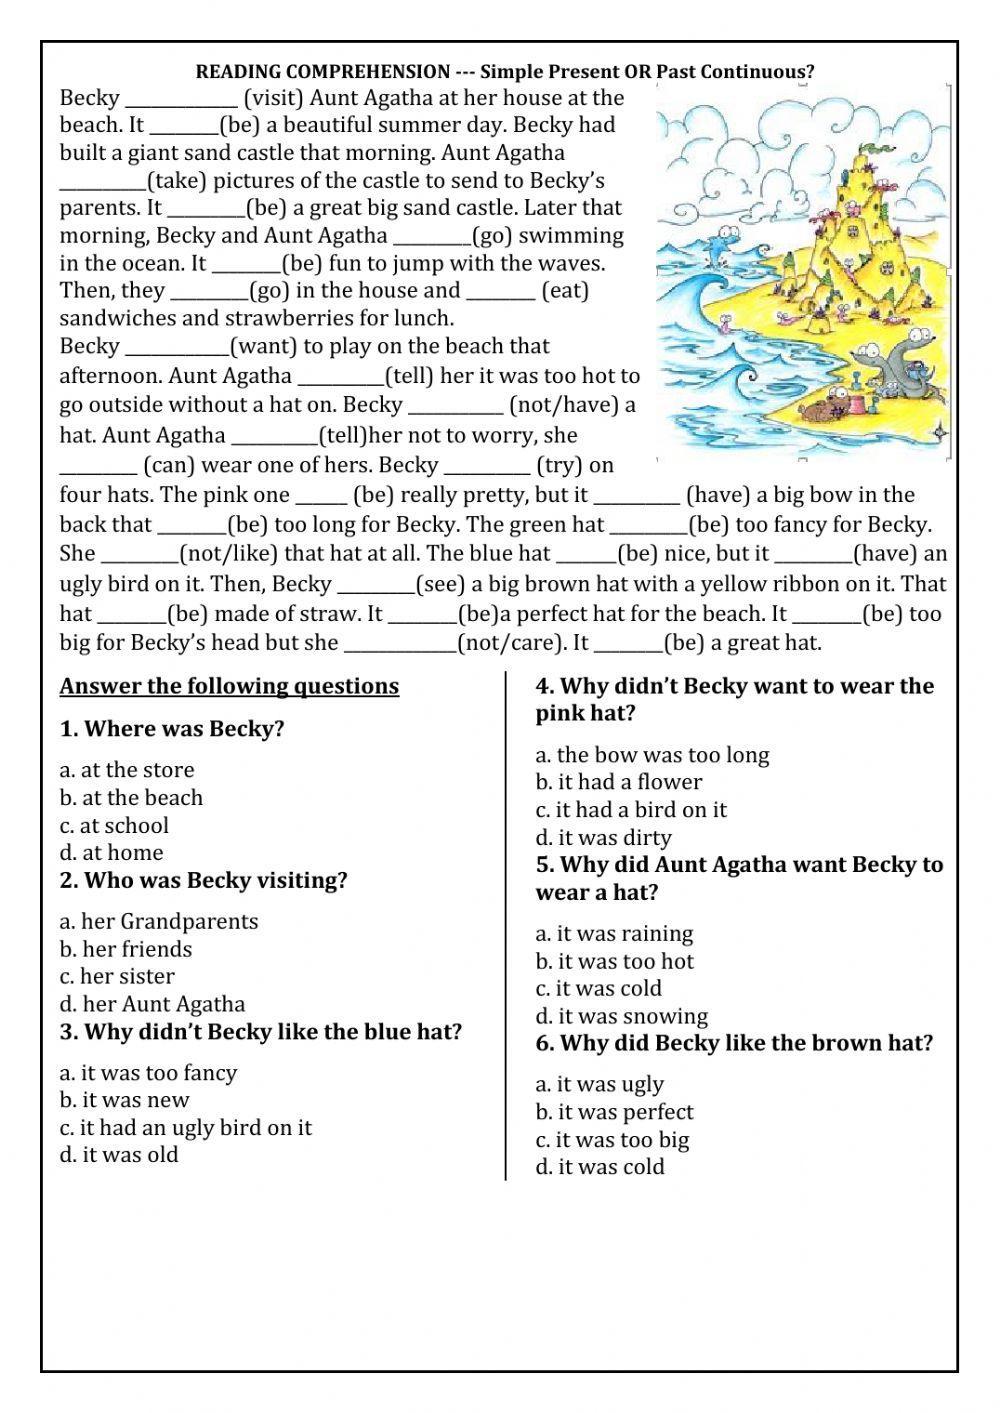 Reading Comprehension -S.Past - Past Continuous worksheet | Live Worksheets